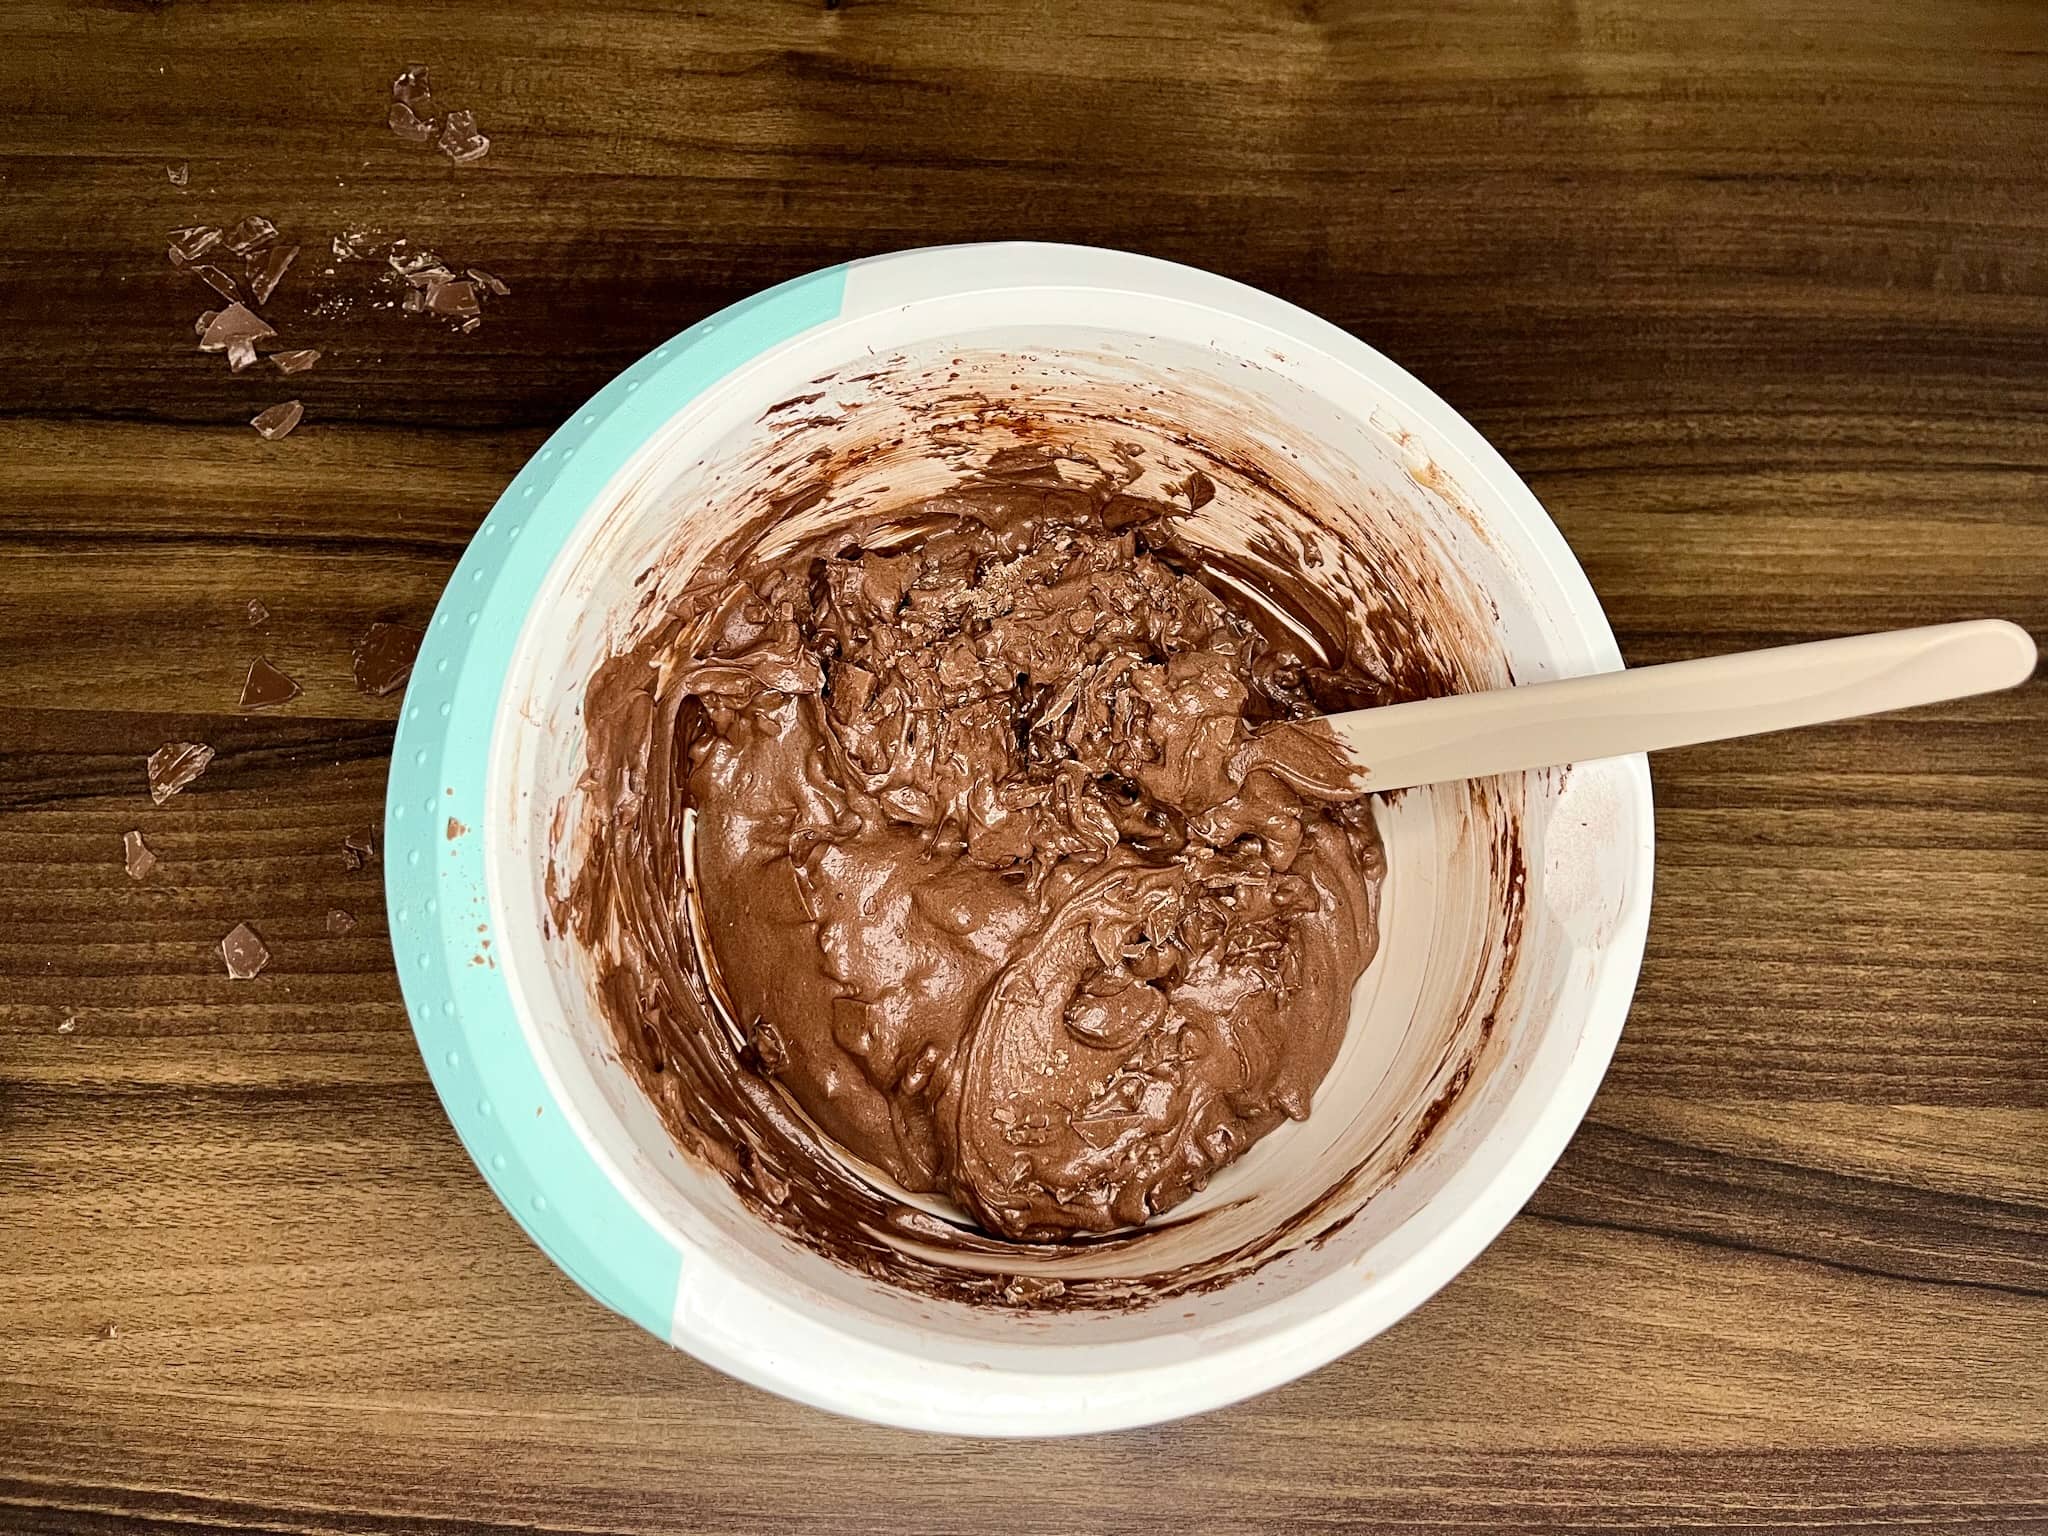 Folding generous chunks of chocolate into the mixed batter in a mixing bowl